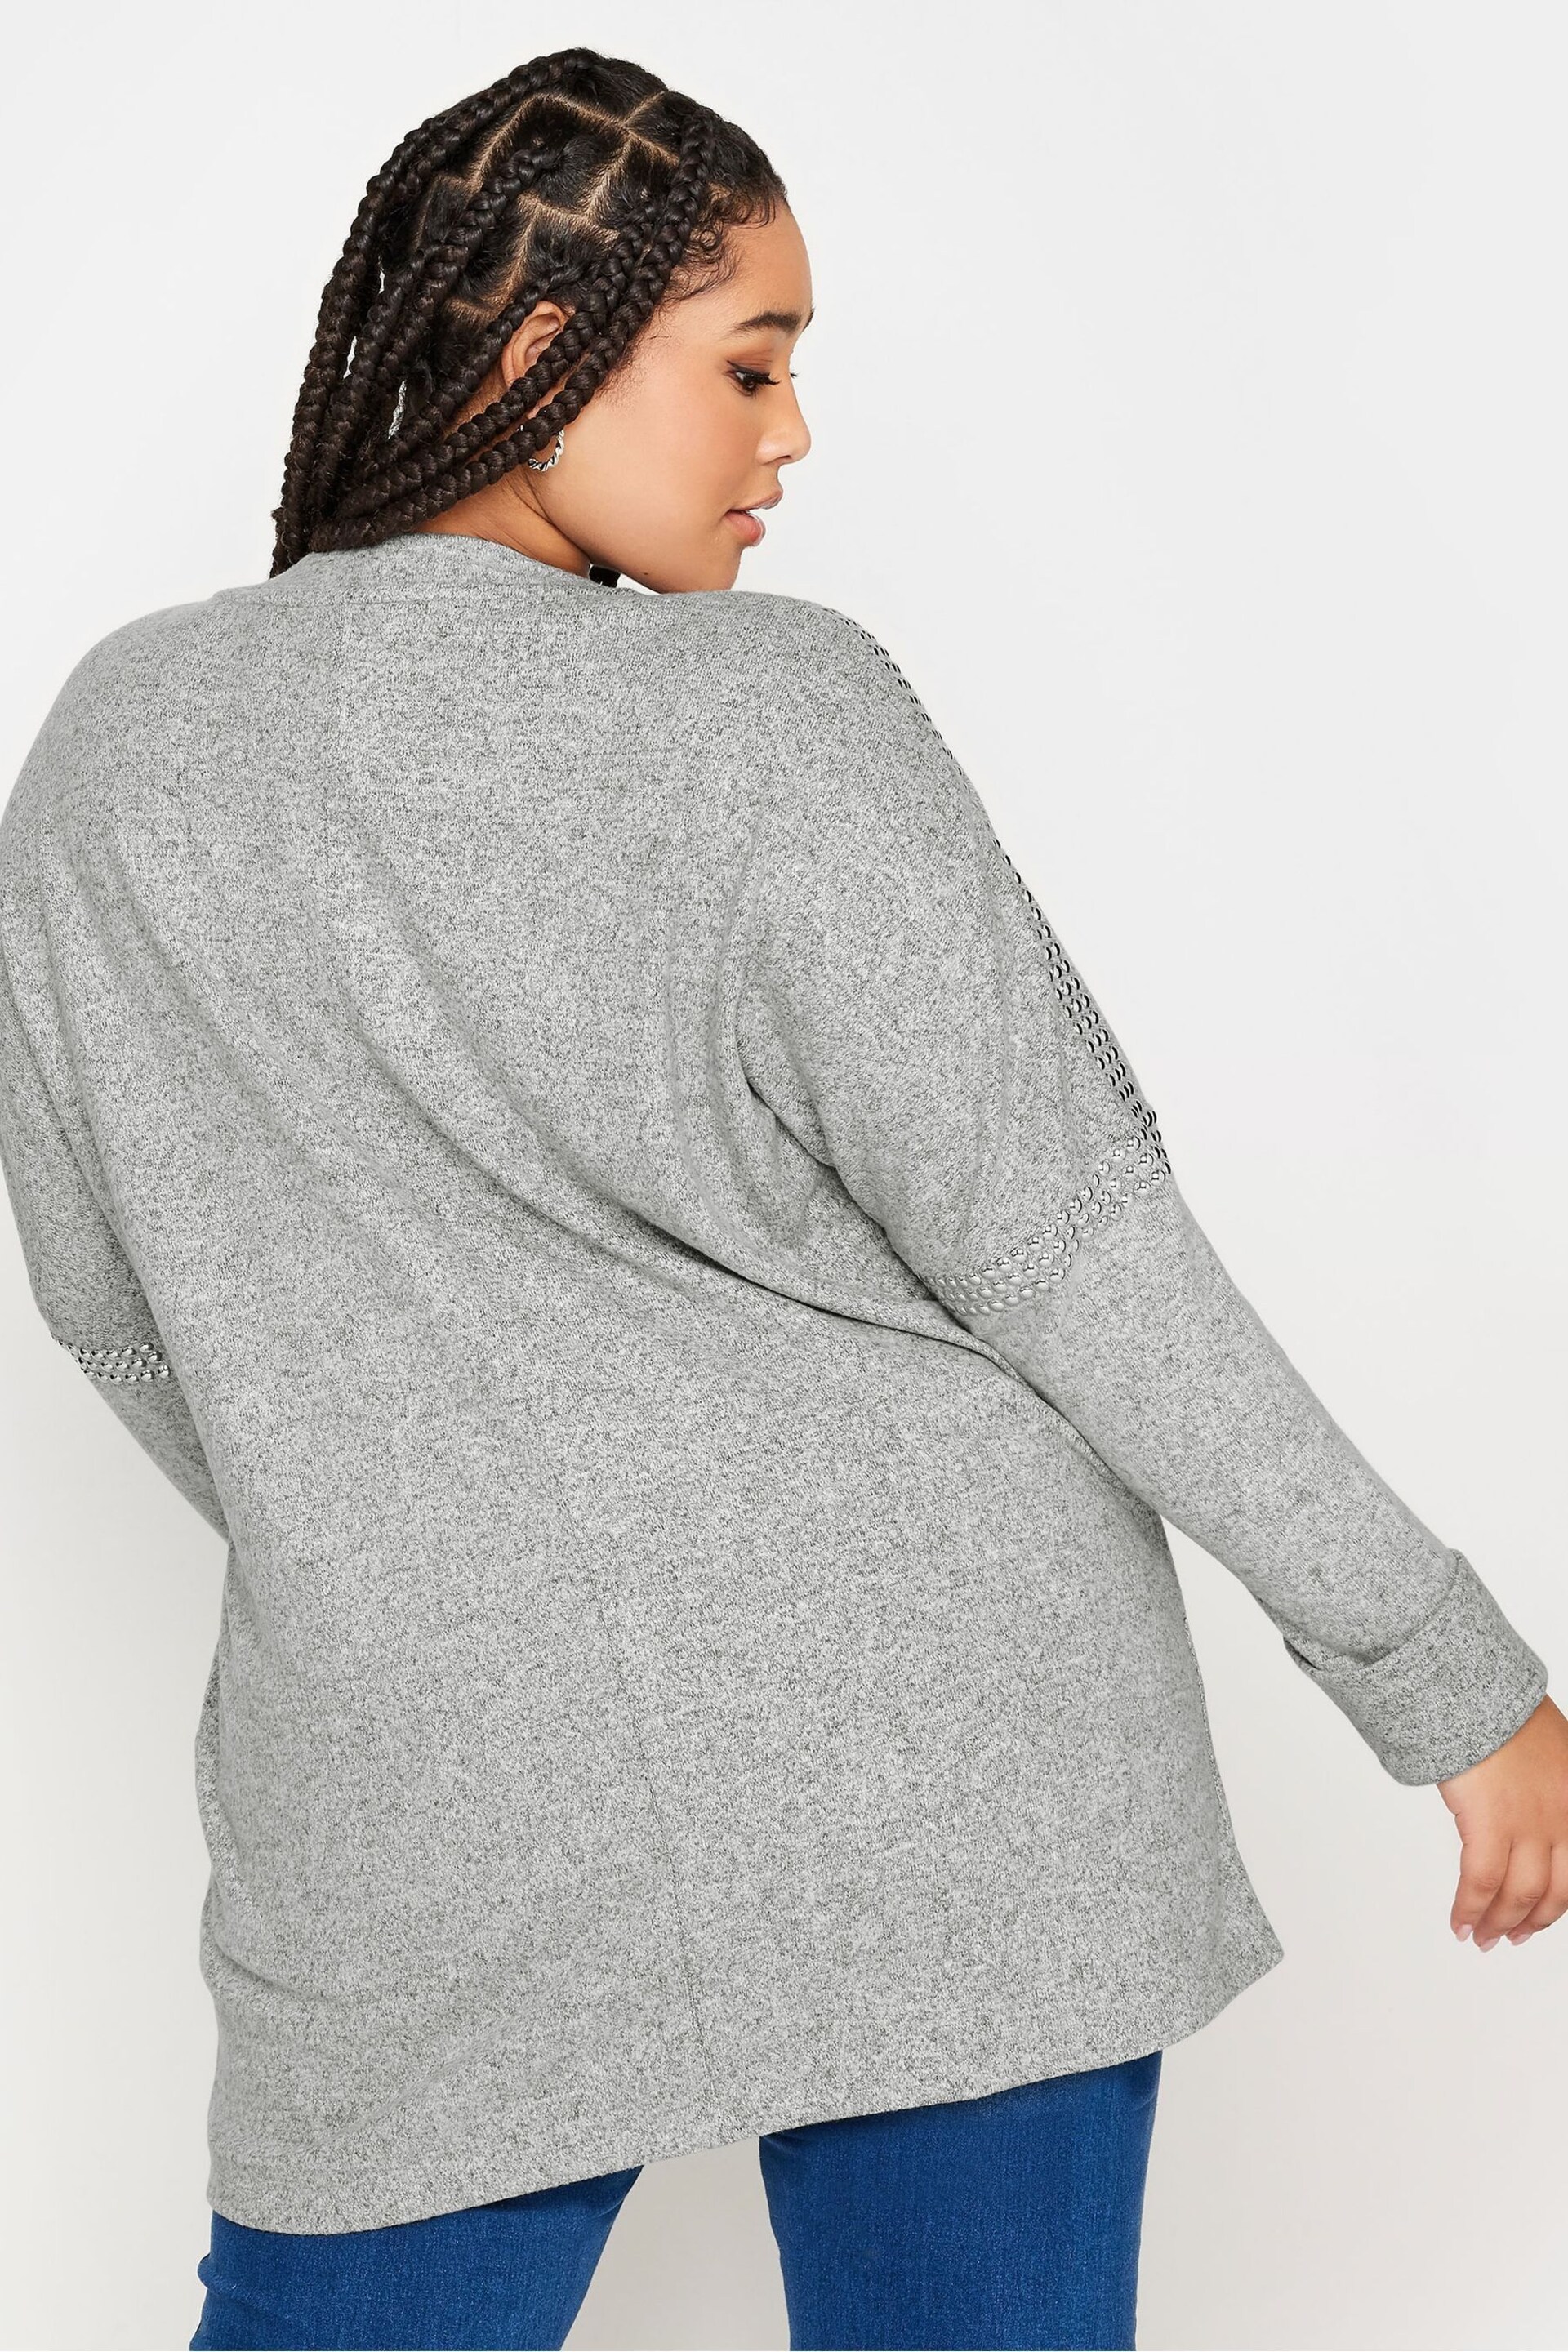 Yours Curve Grey Studded Batwing Jumper - Image 2 of 4